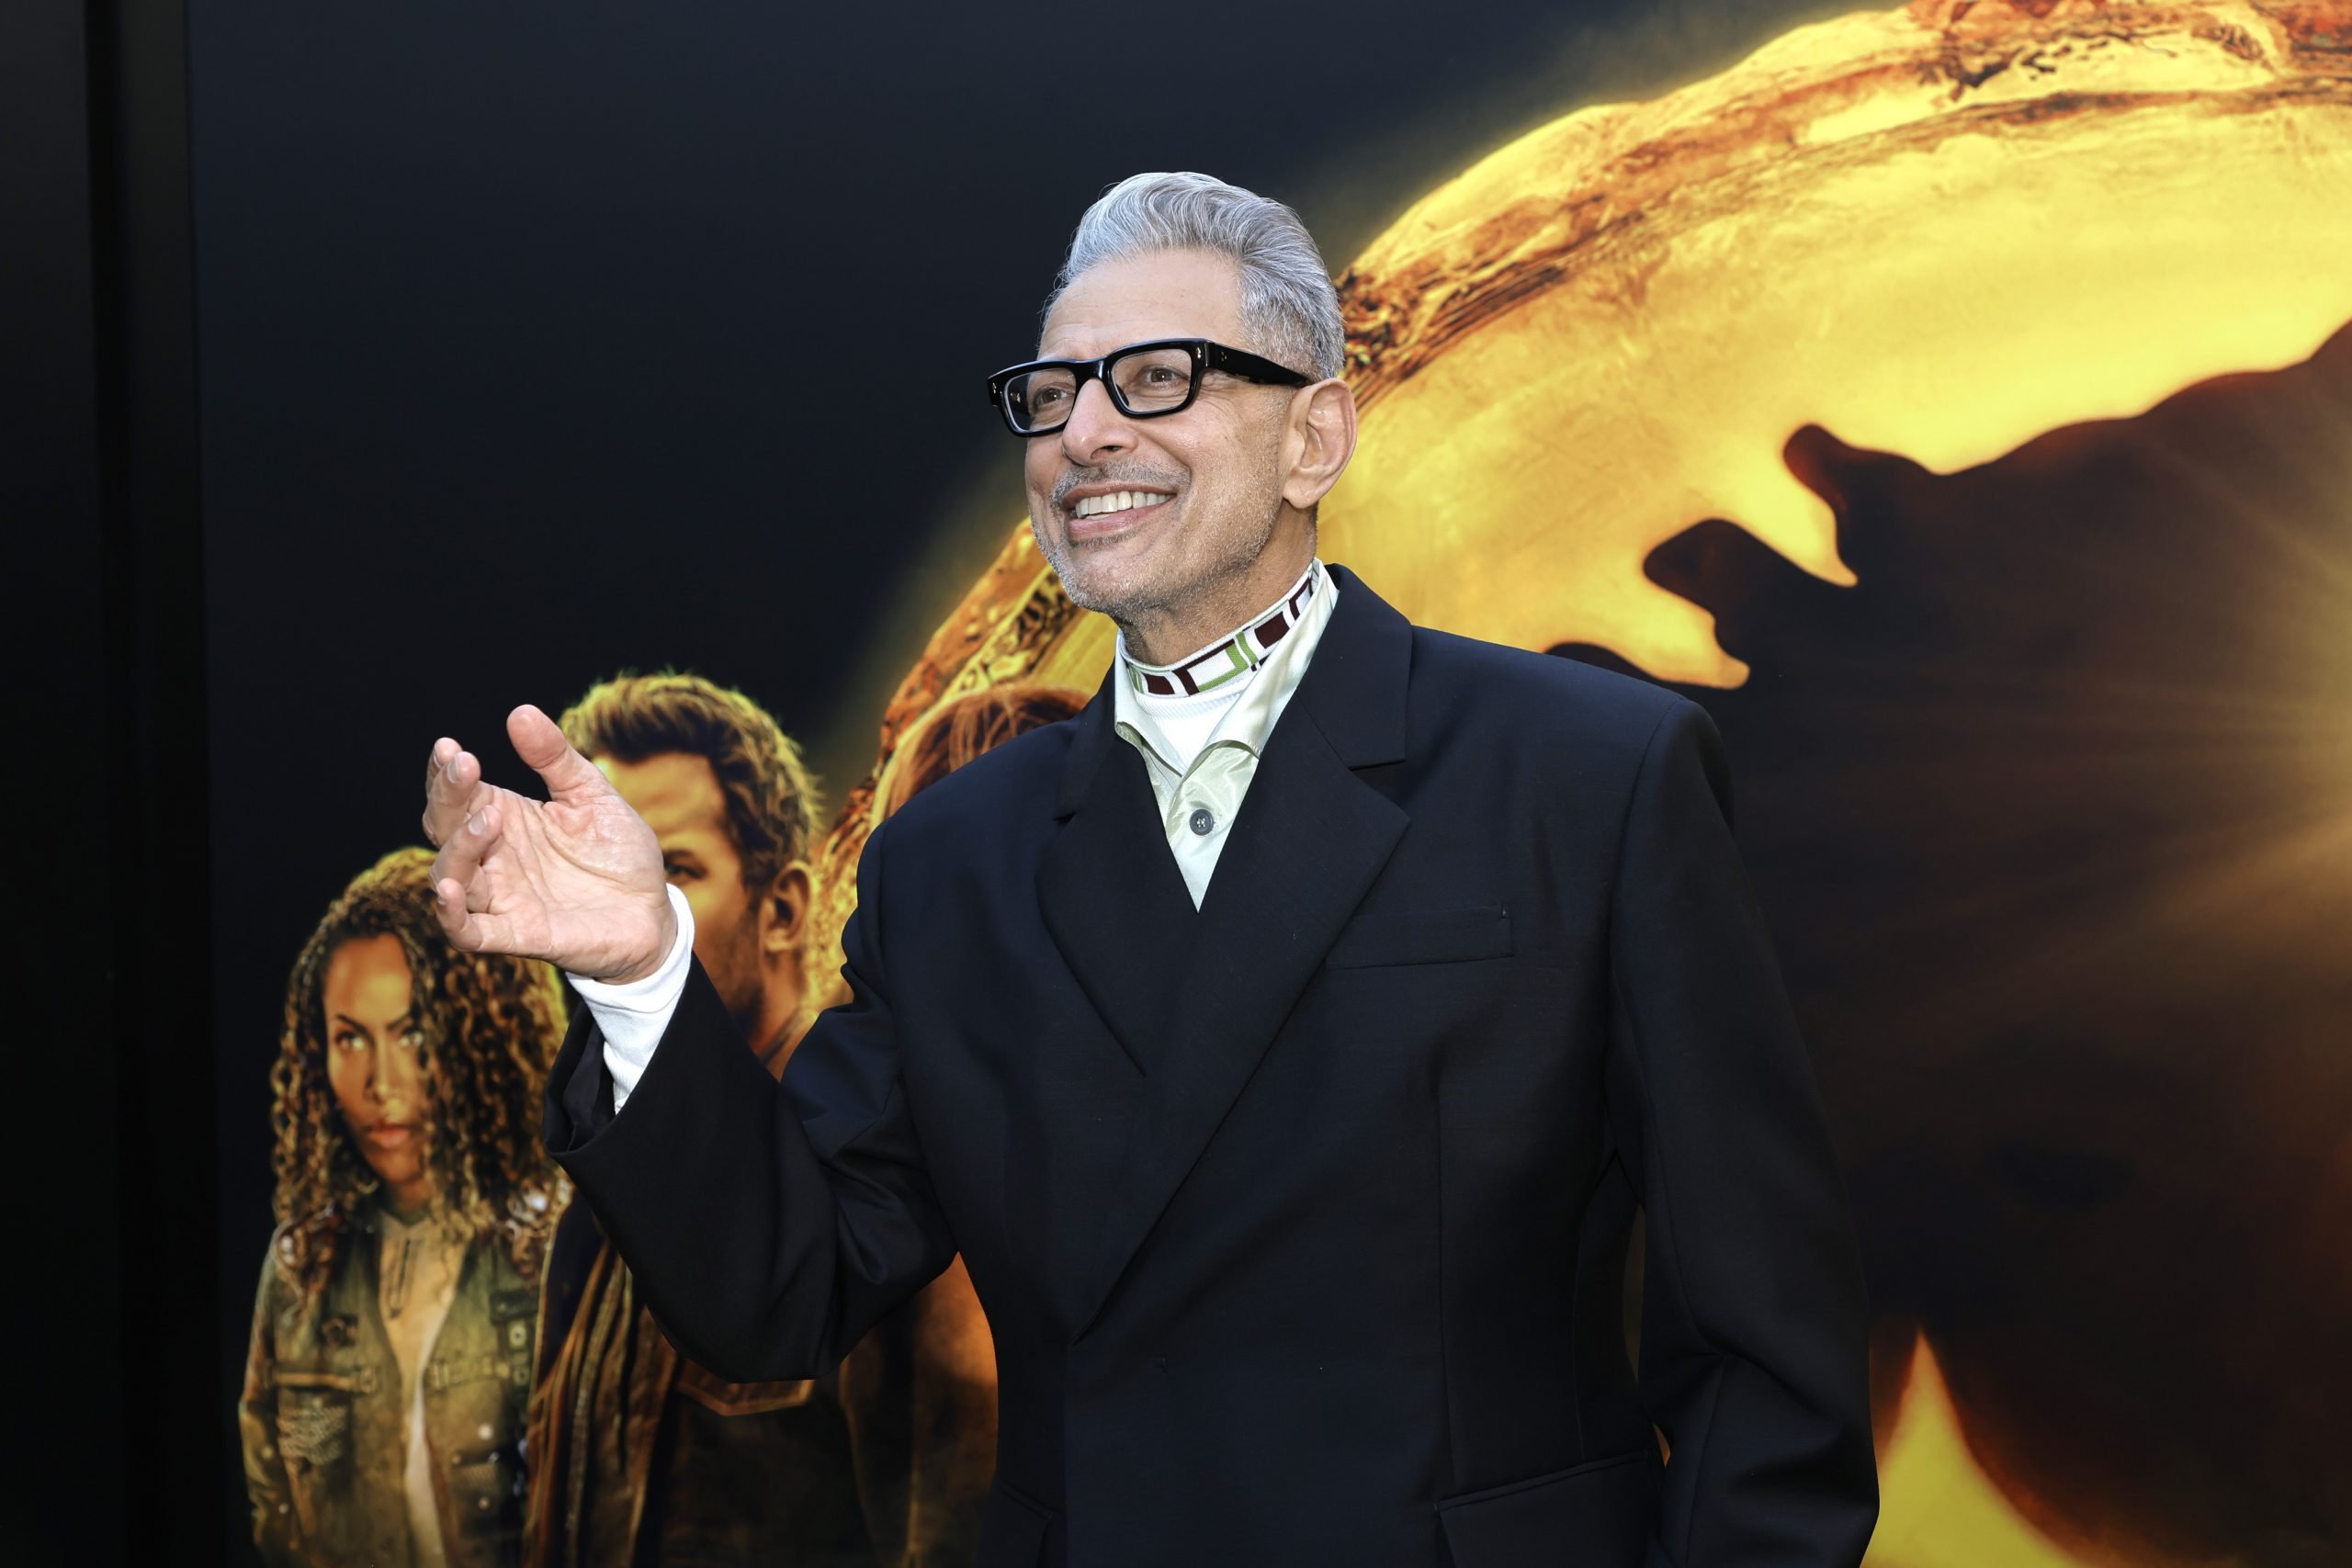 ‘Jurassic World Dominion’ Legacy Cast Welcomed Jeff Goldblum With a ‘Royal Greeting’